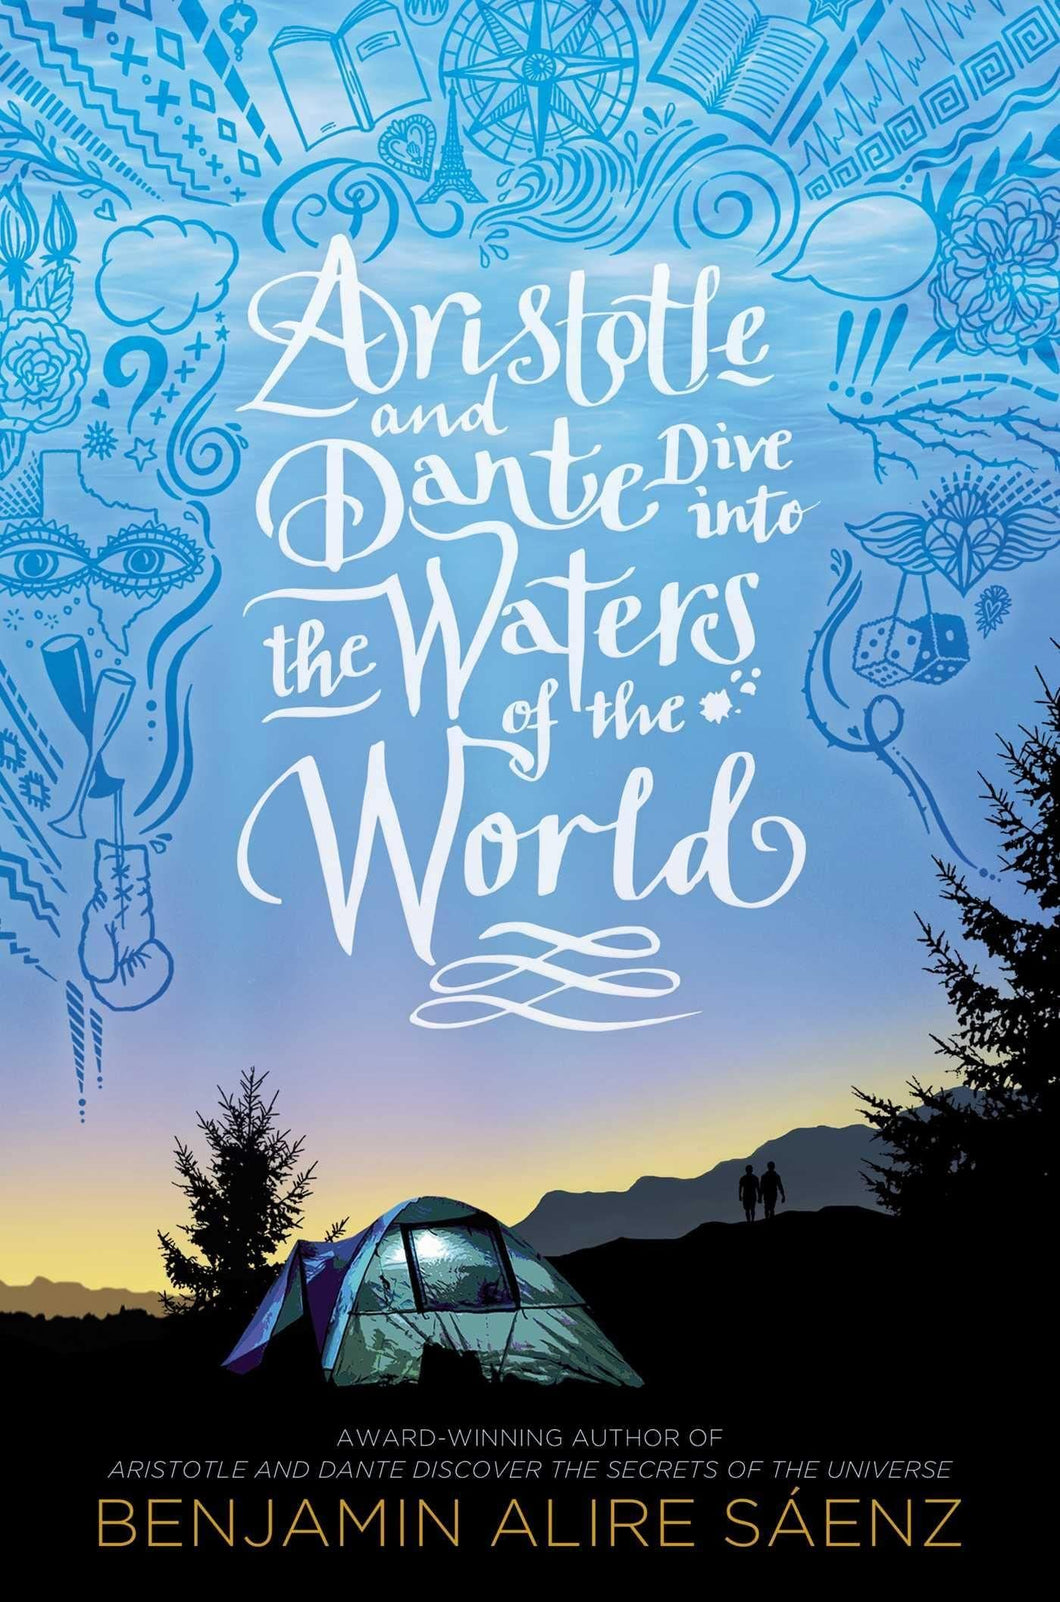 Aristotle and Dante Dive Into the Waters of the World by Benjamin Alire Sáenz / Hardcover - NEW BOOK